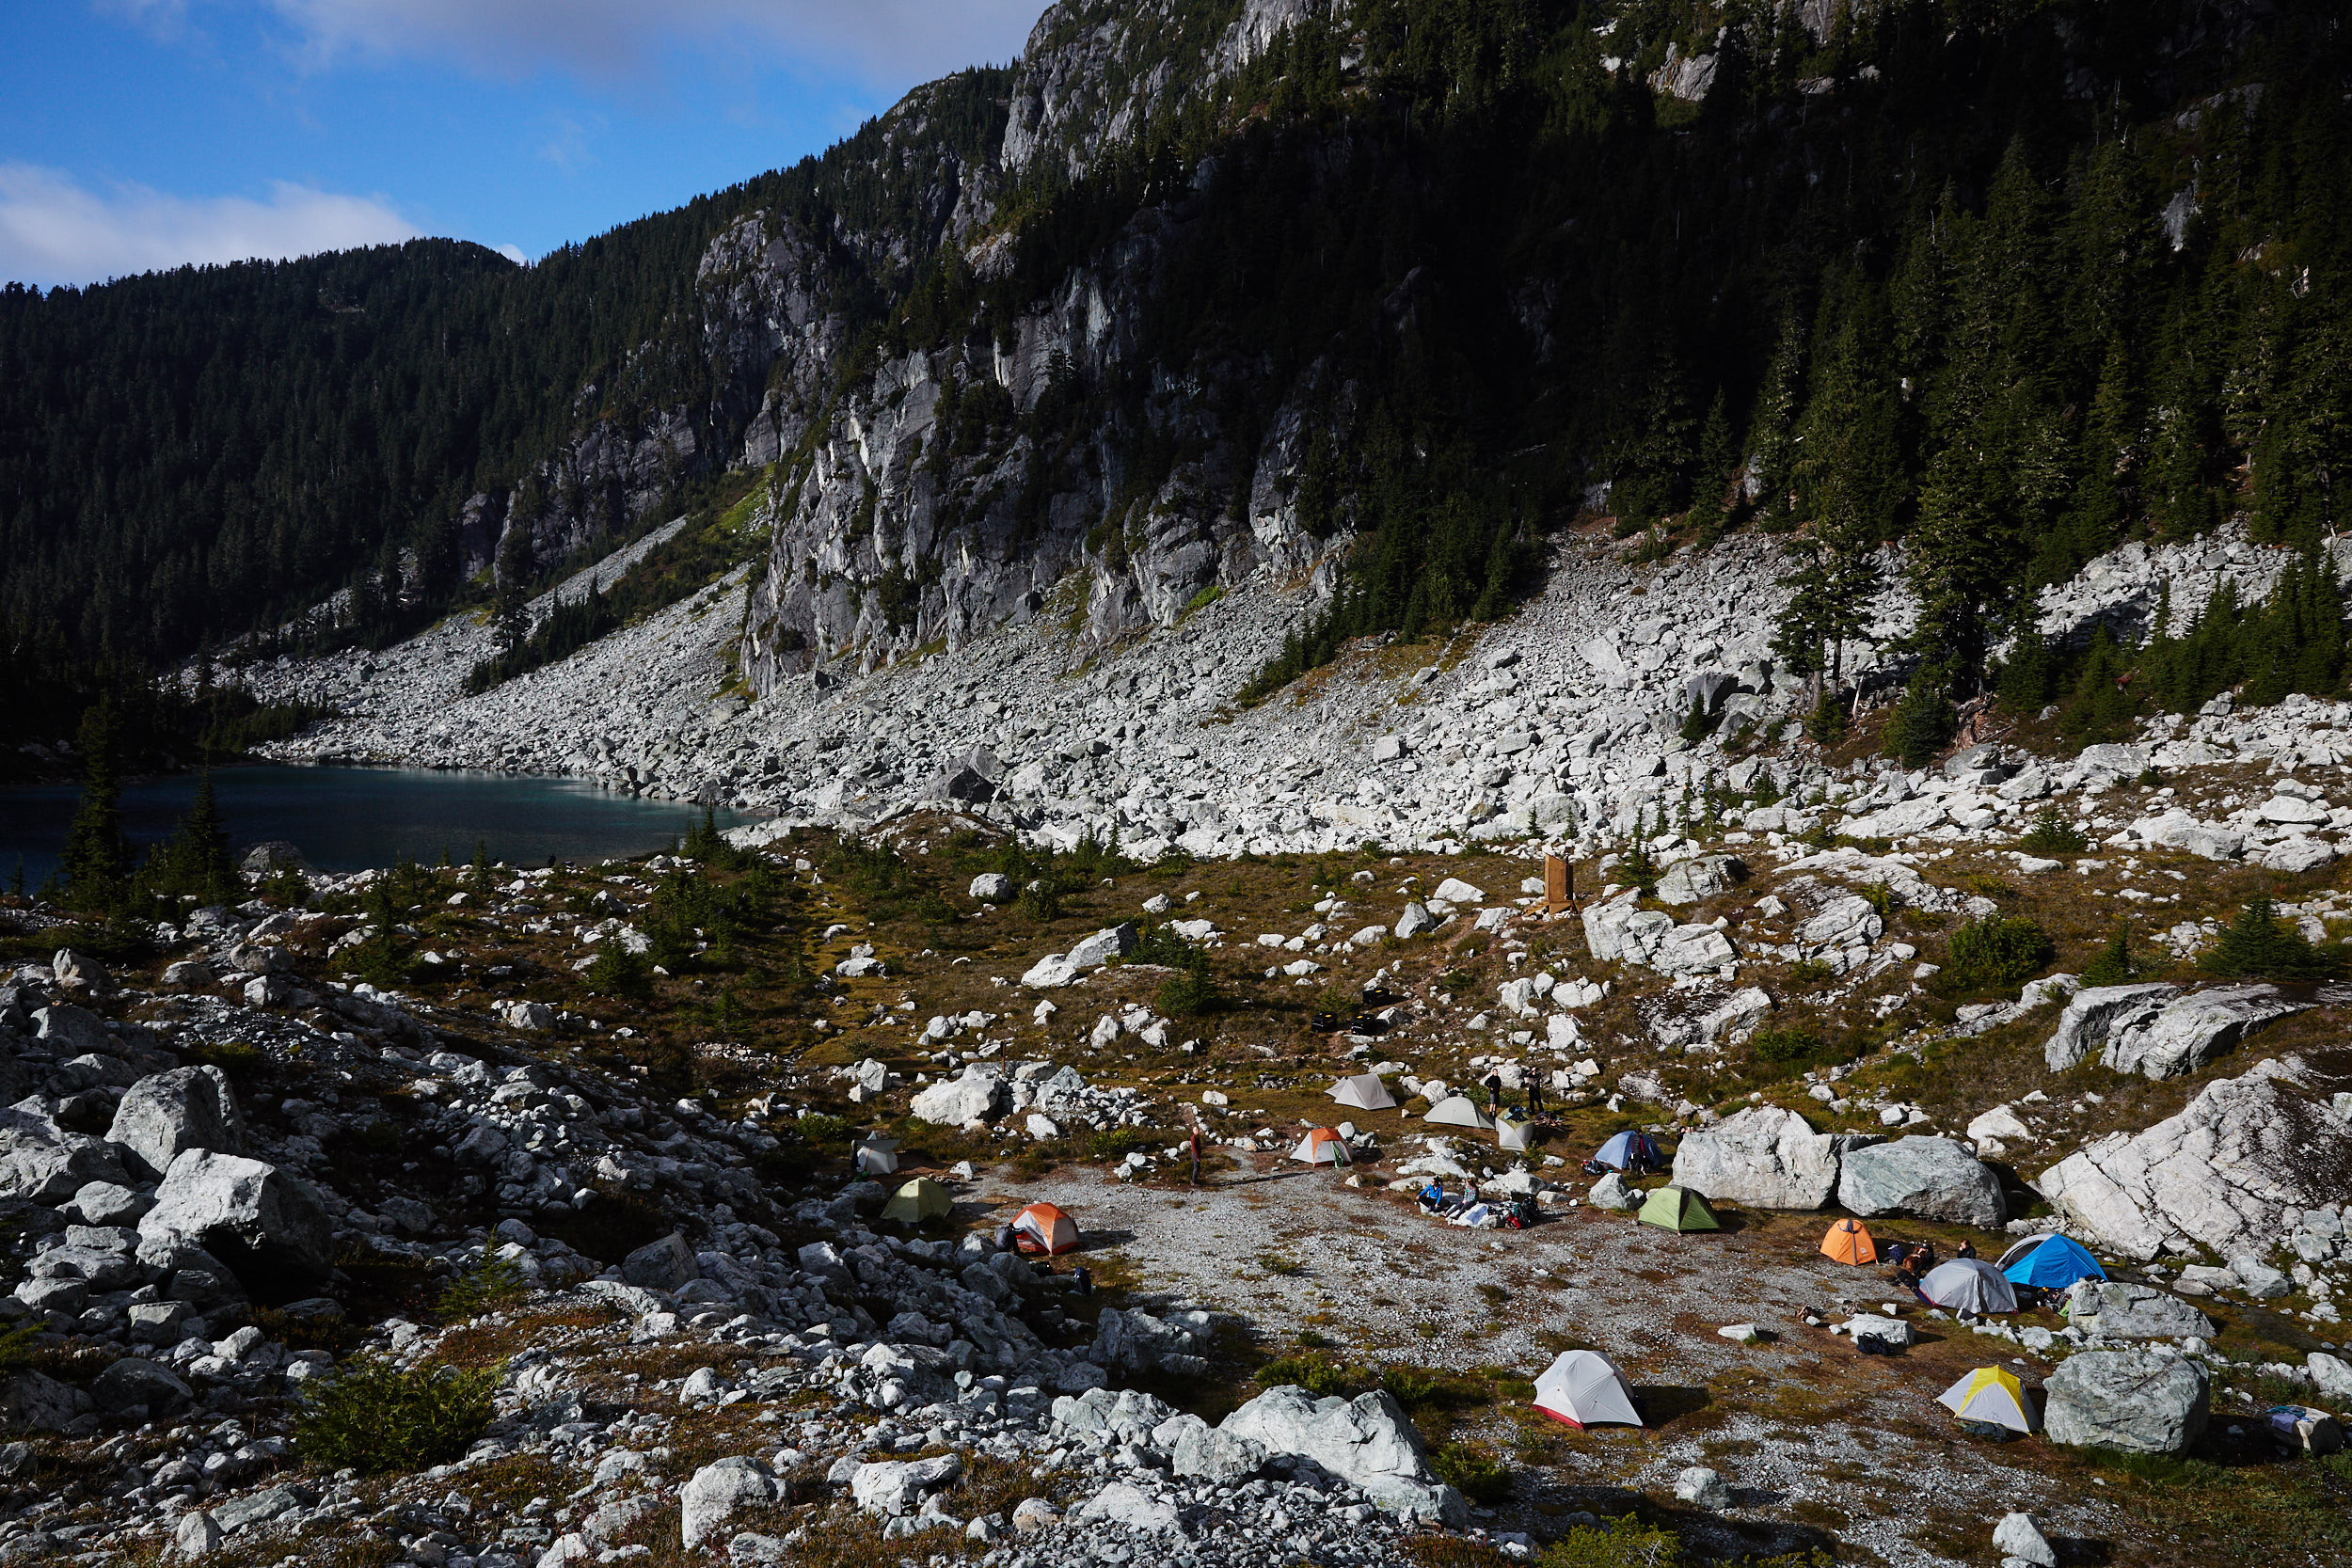  Once we setup camp, we continued up behind the lake to attempt Martin peak. 